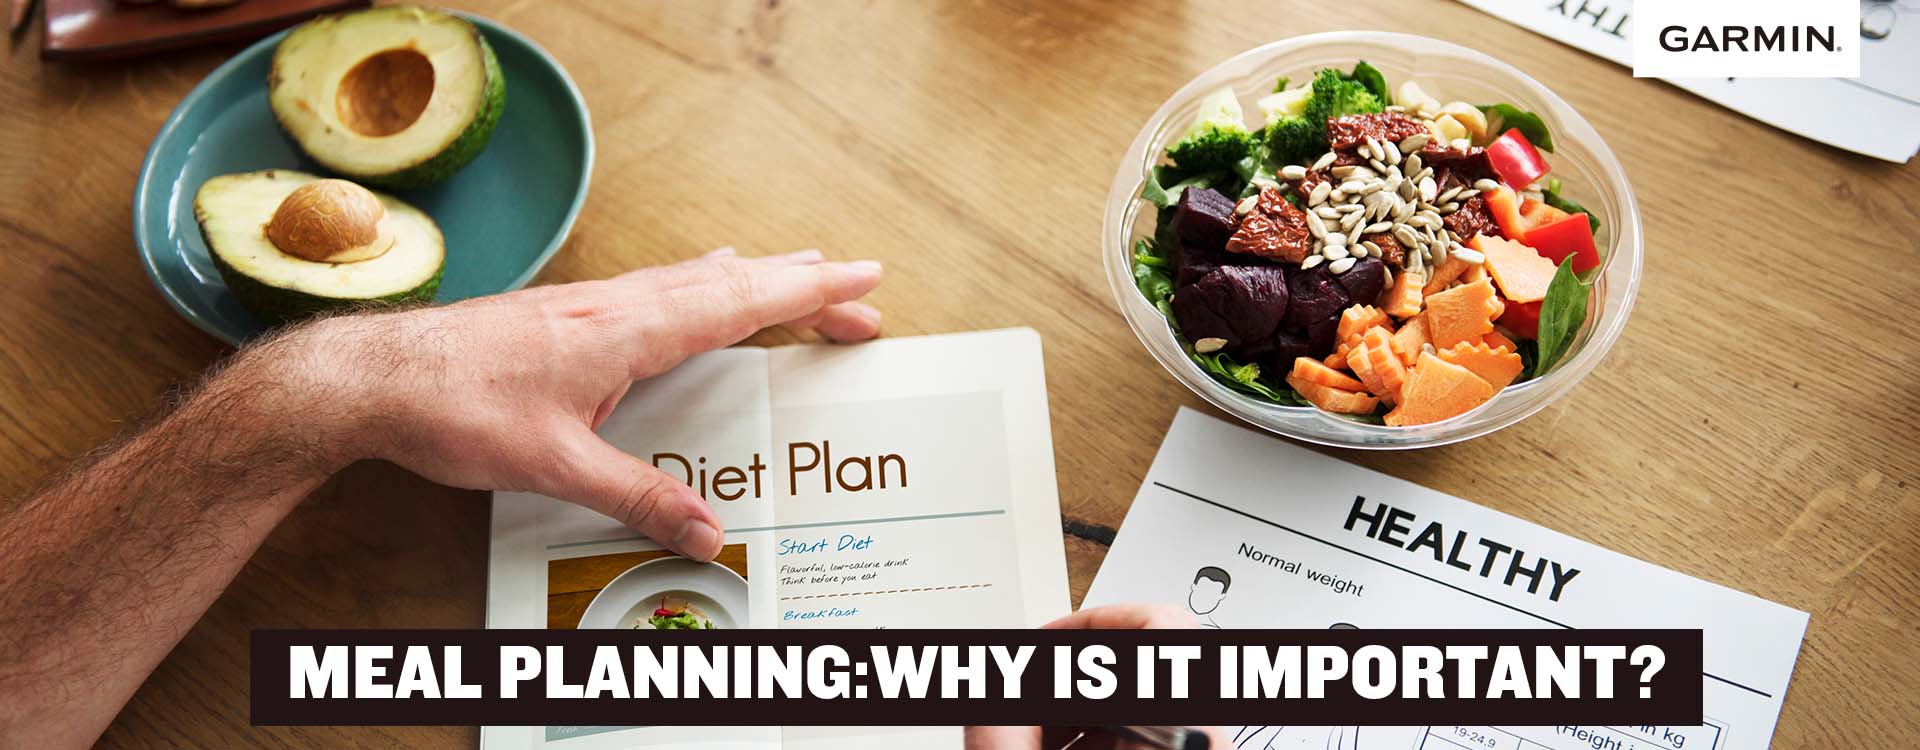 Meal Planning: Why Is It Important?